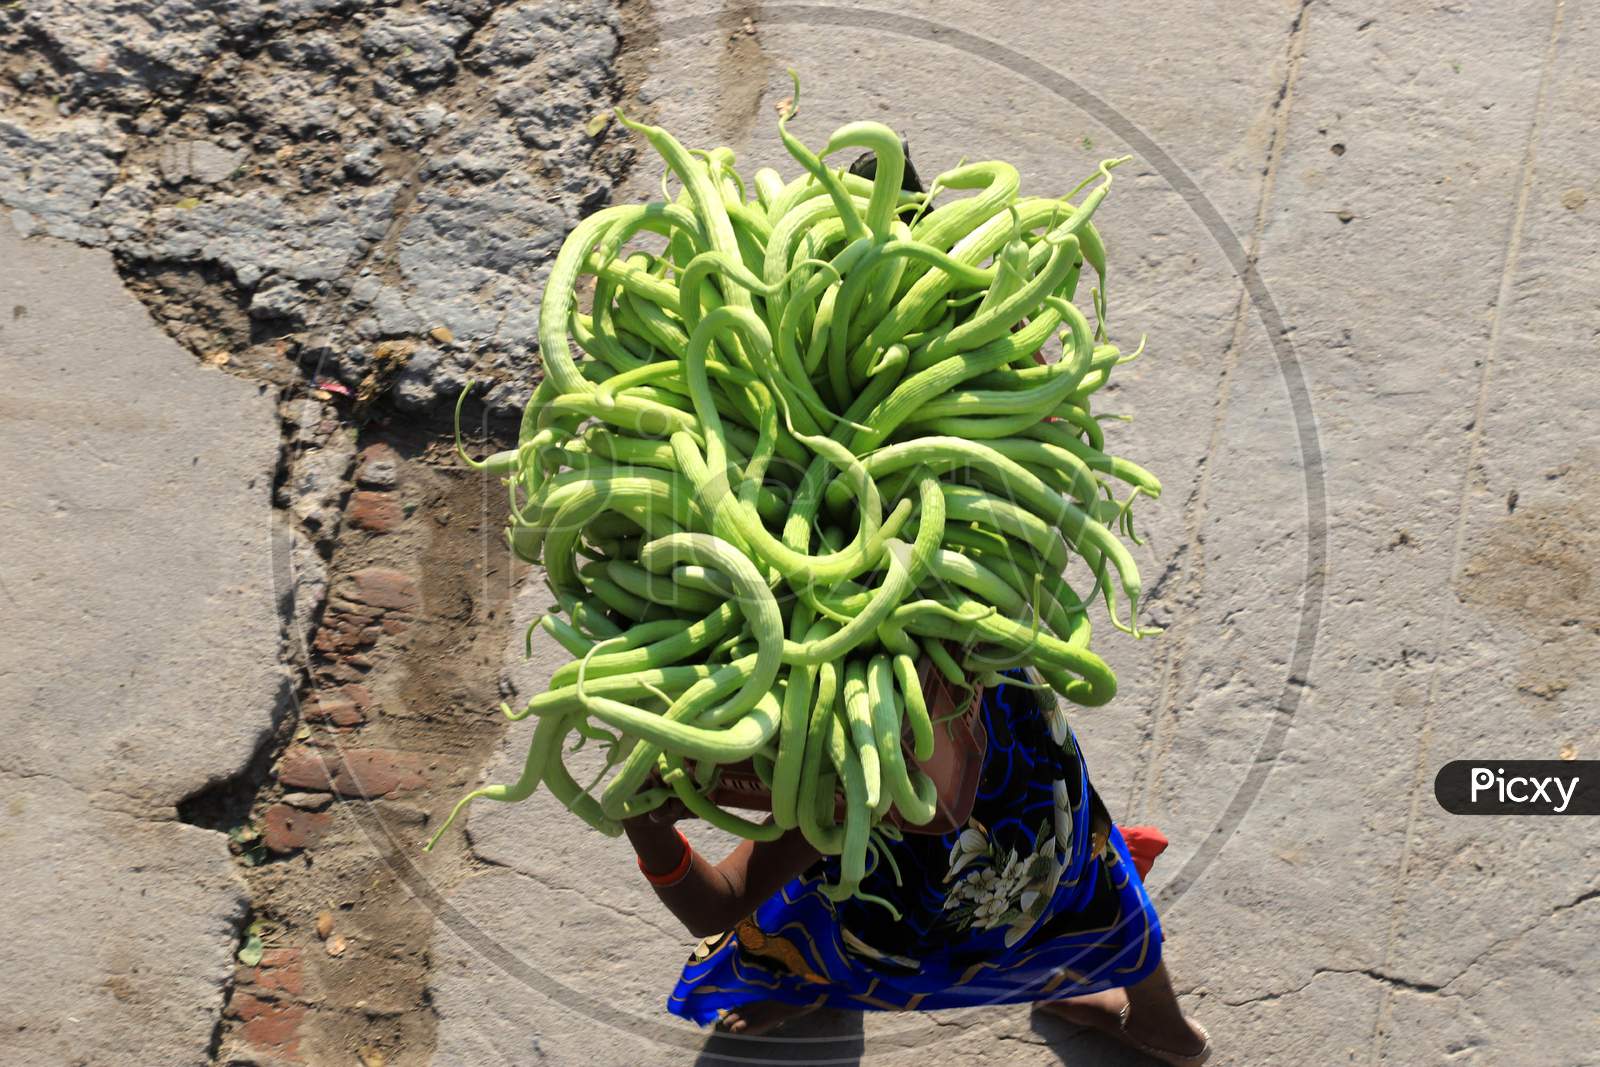 A woman carries a basket of Cucumber on her head to the market, during government-imposed nationwide lockdown as a preventive measure against the COVID-19 or Coronavirus in Prayagraj, April 29, 2020.